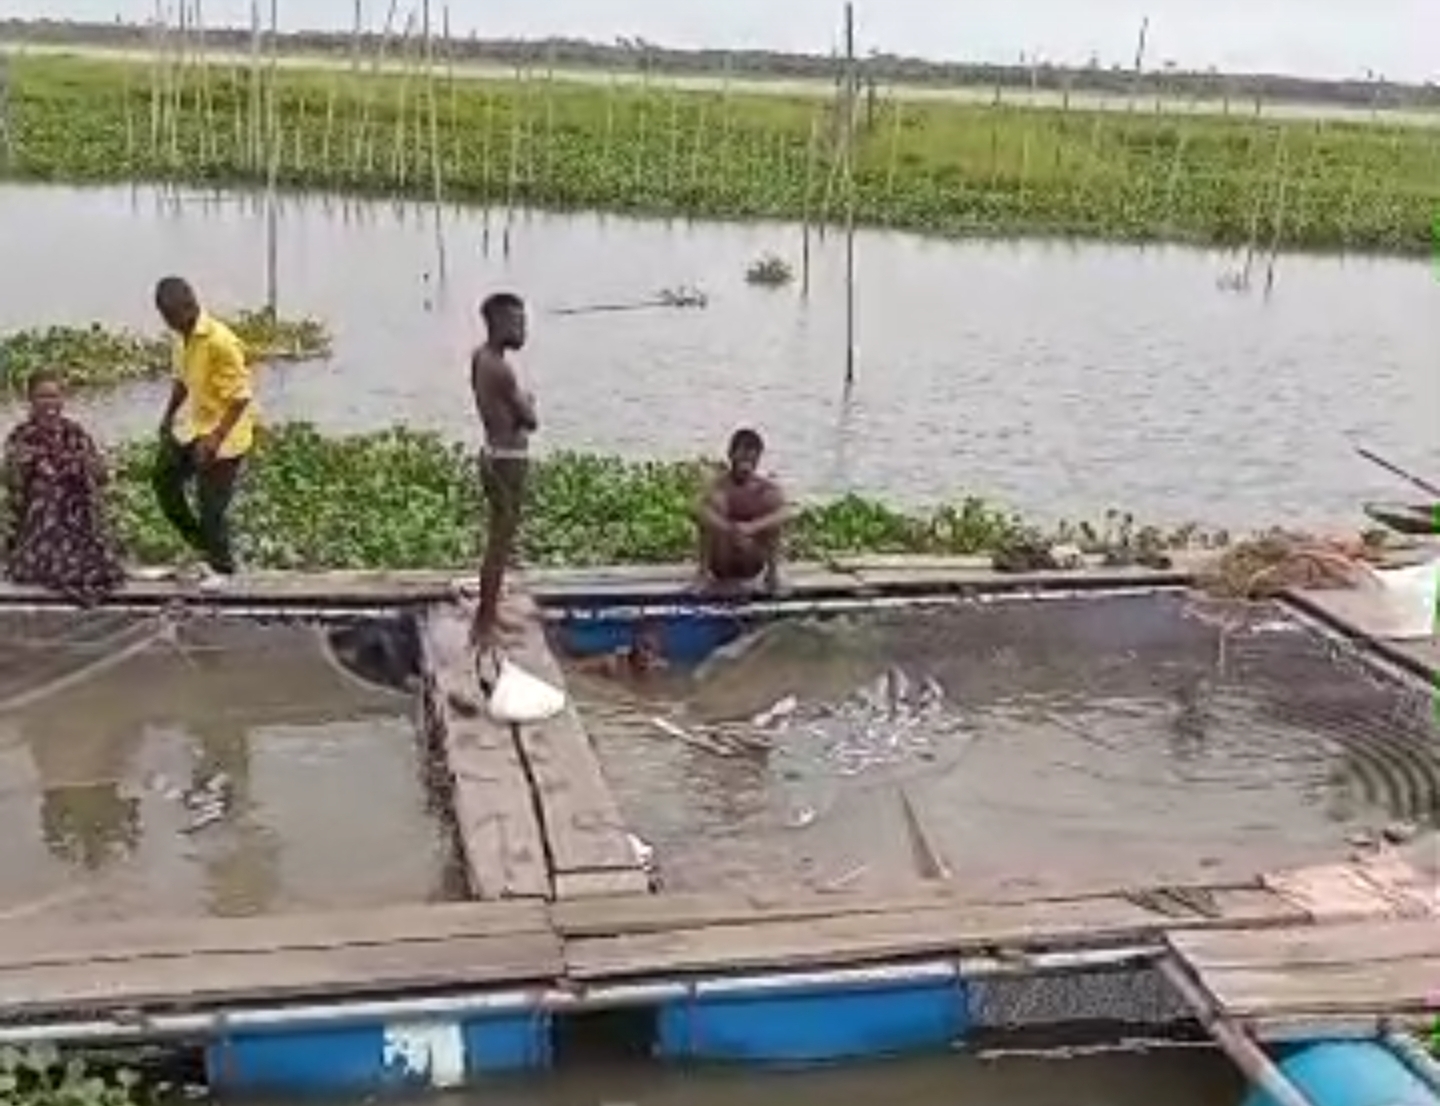 Some of the dead fish float on the water at Oluwo Fish Market, Epe, Lagos State